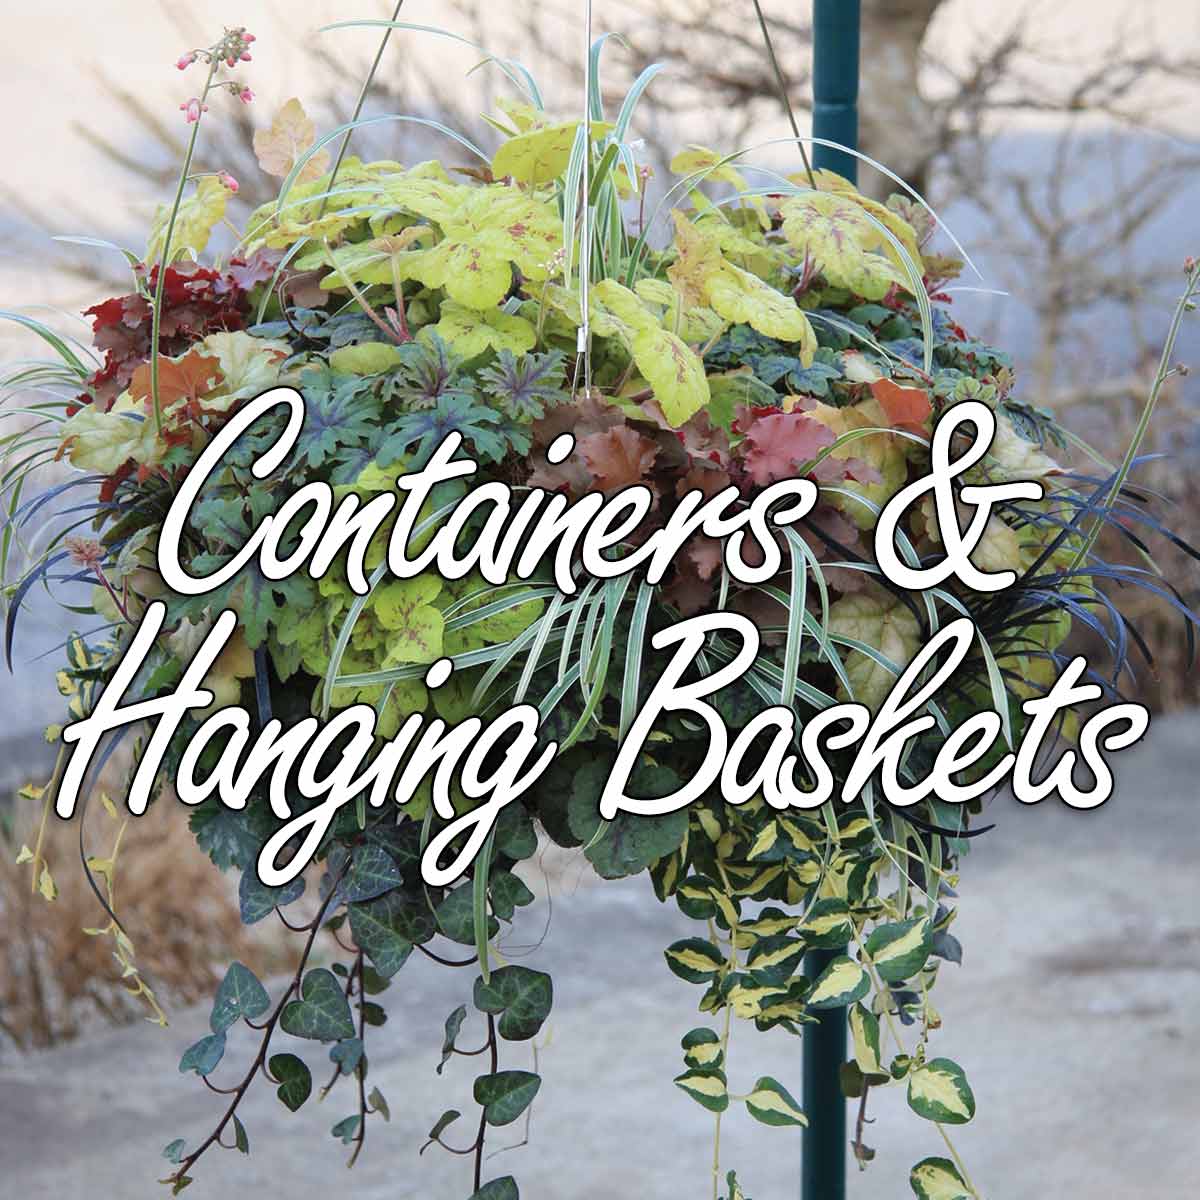 Containers & Hanging Baskets